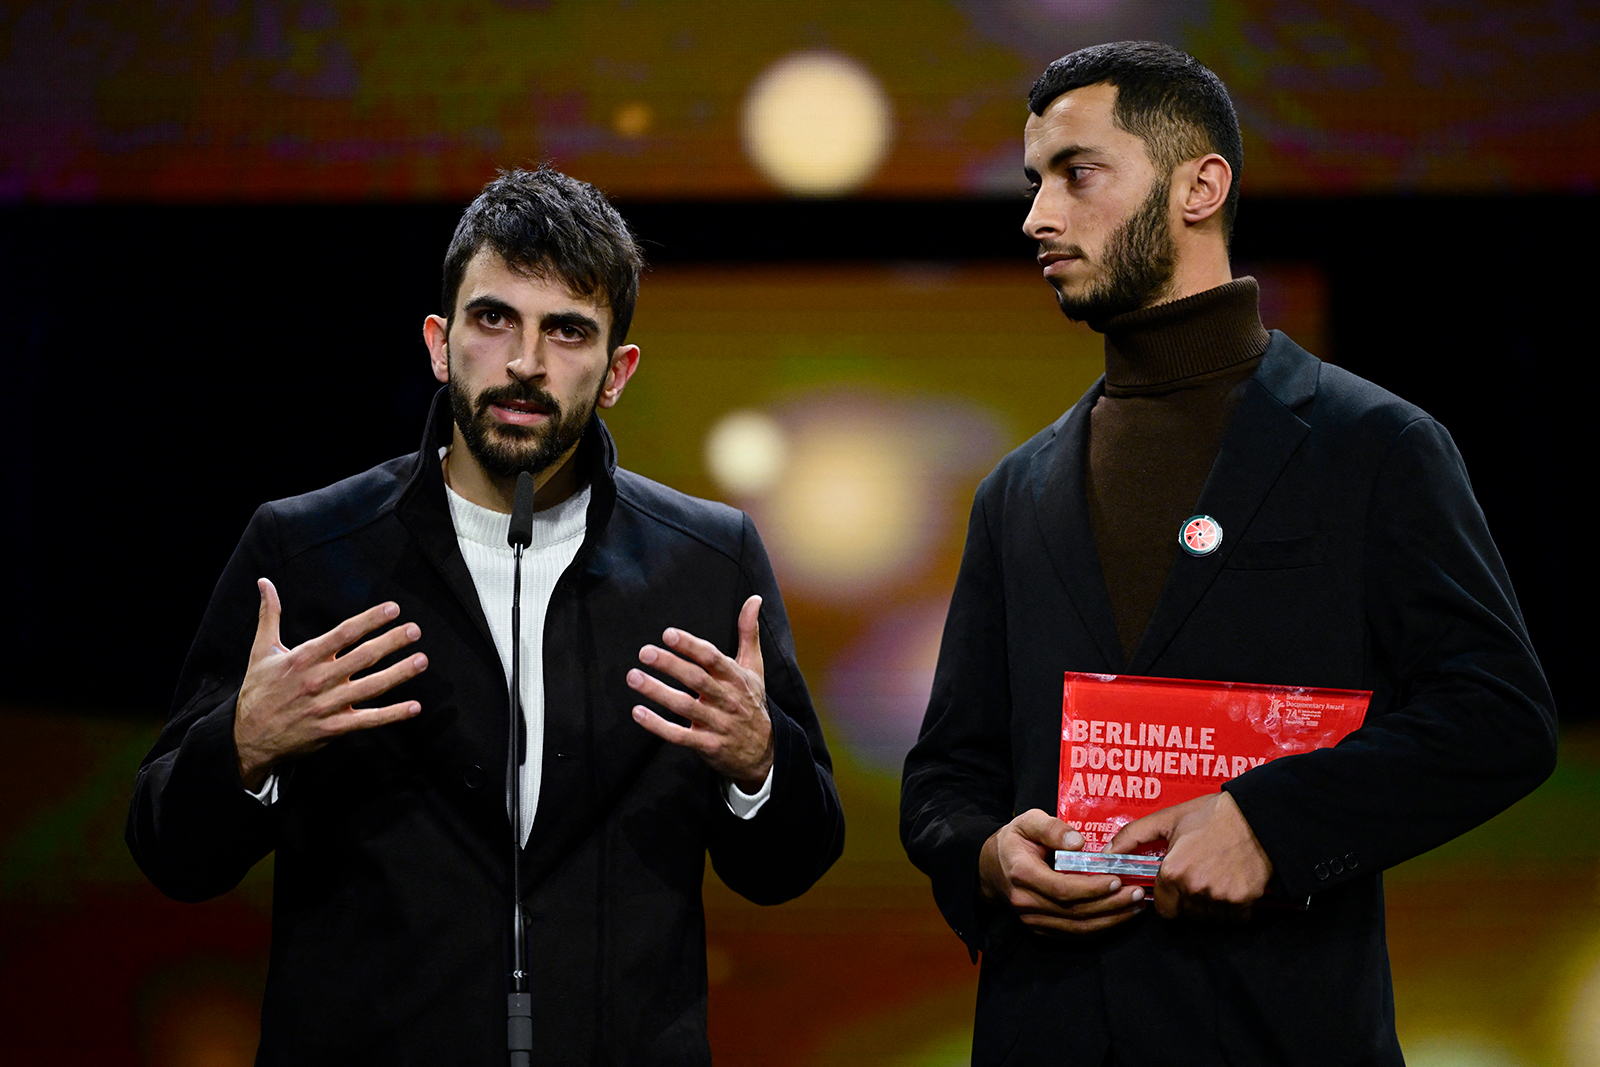 Israeli director Yuval Abraham, left, and Palestinian director Basel Adra speak on stage during the awards ceremony of the 74th Berlinale International Film Festival, in Berlin on February 24.